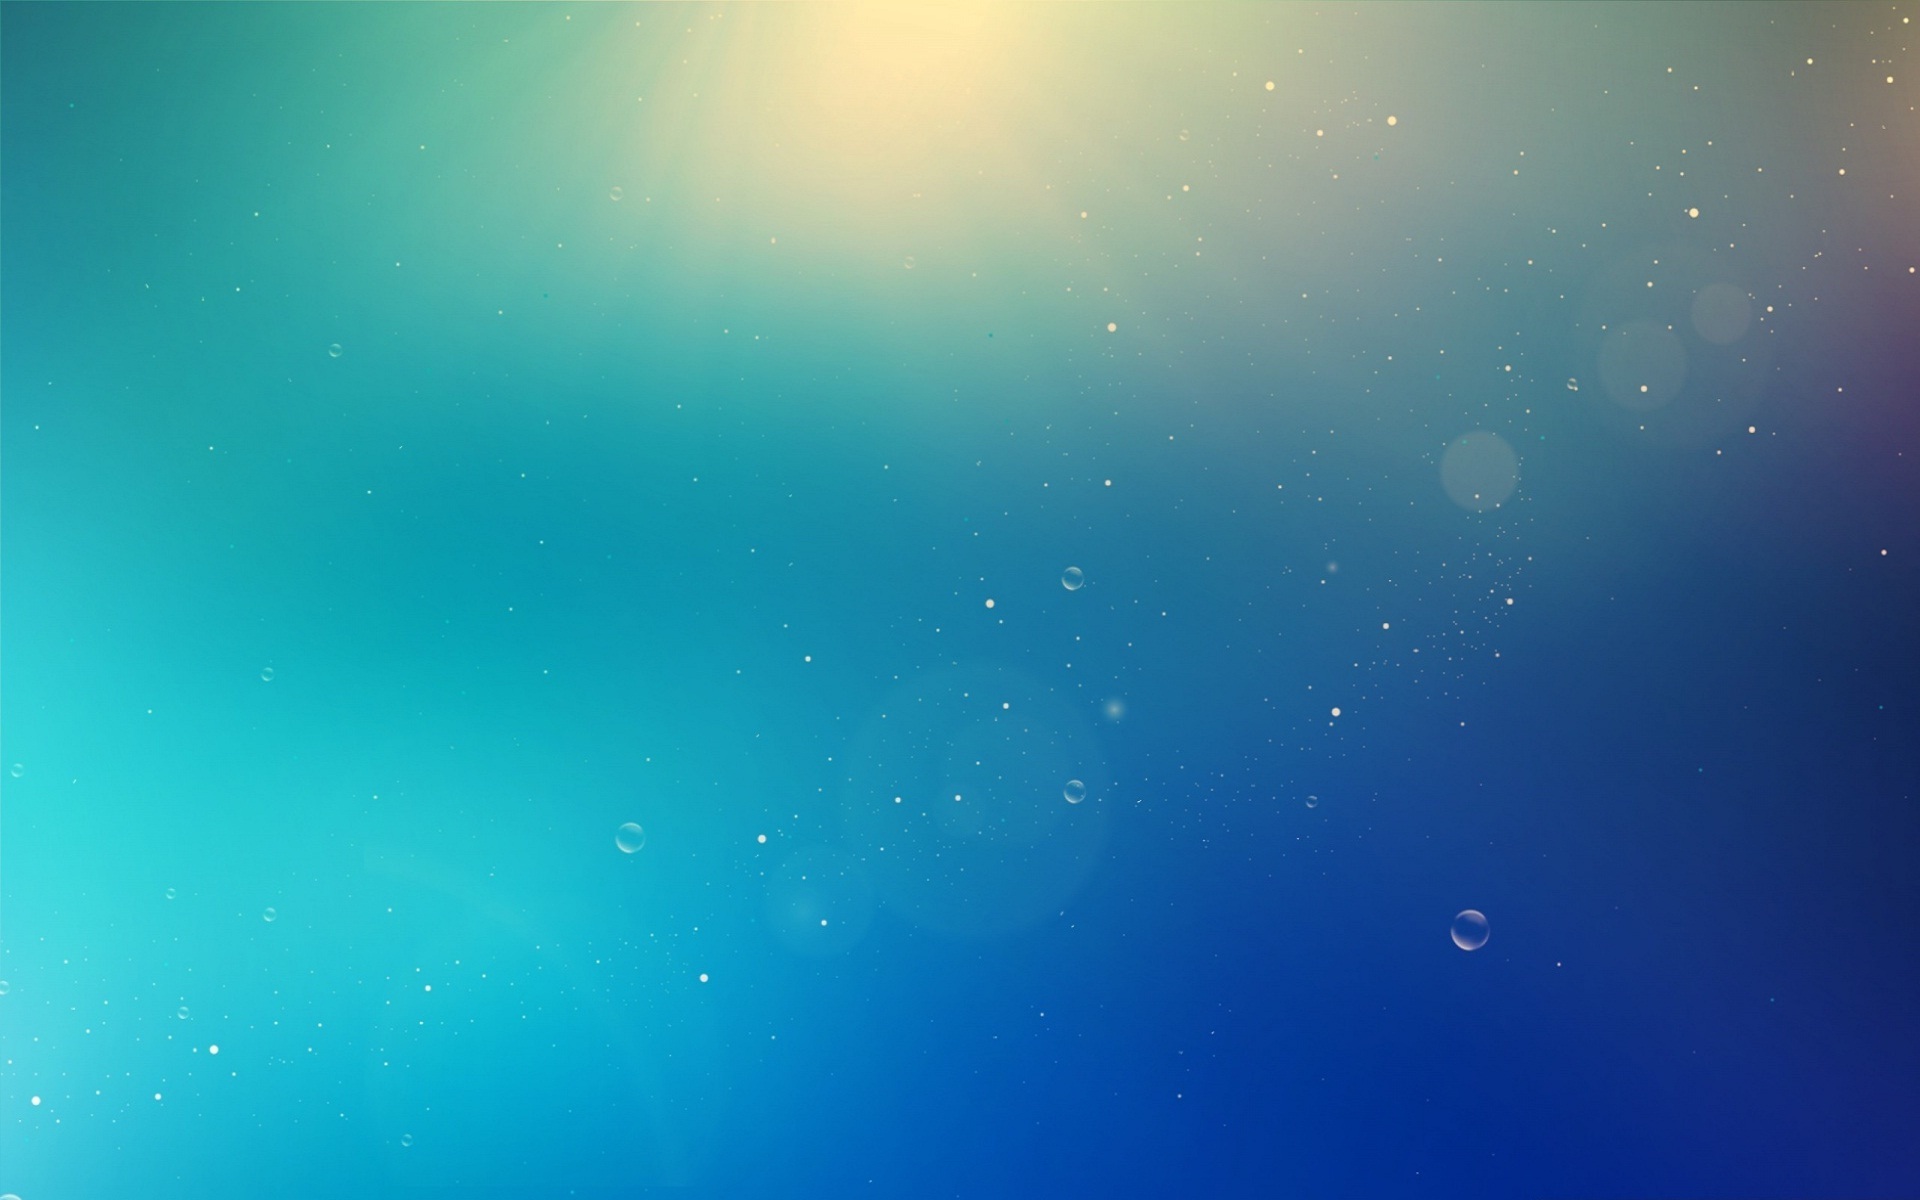 shine-beautiful-abstract-background-wallpapers | HD Wallpapers Rocks